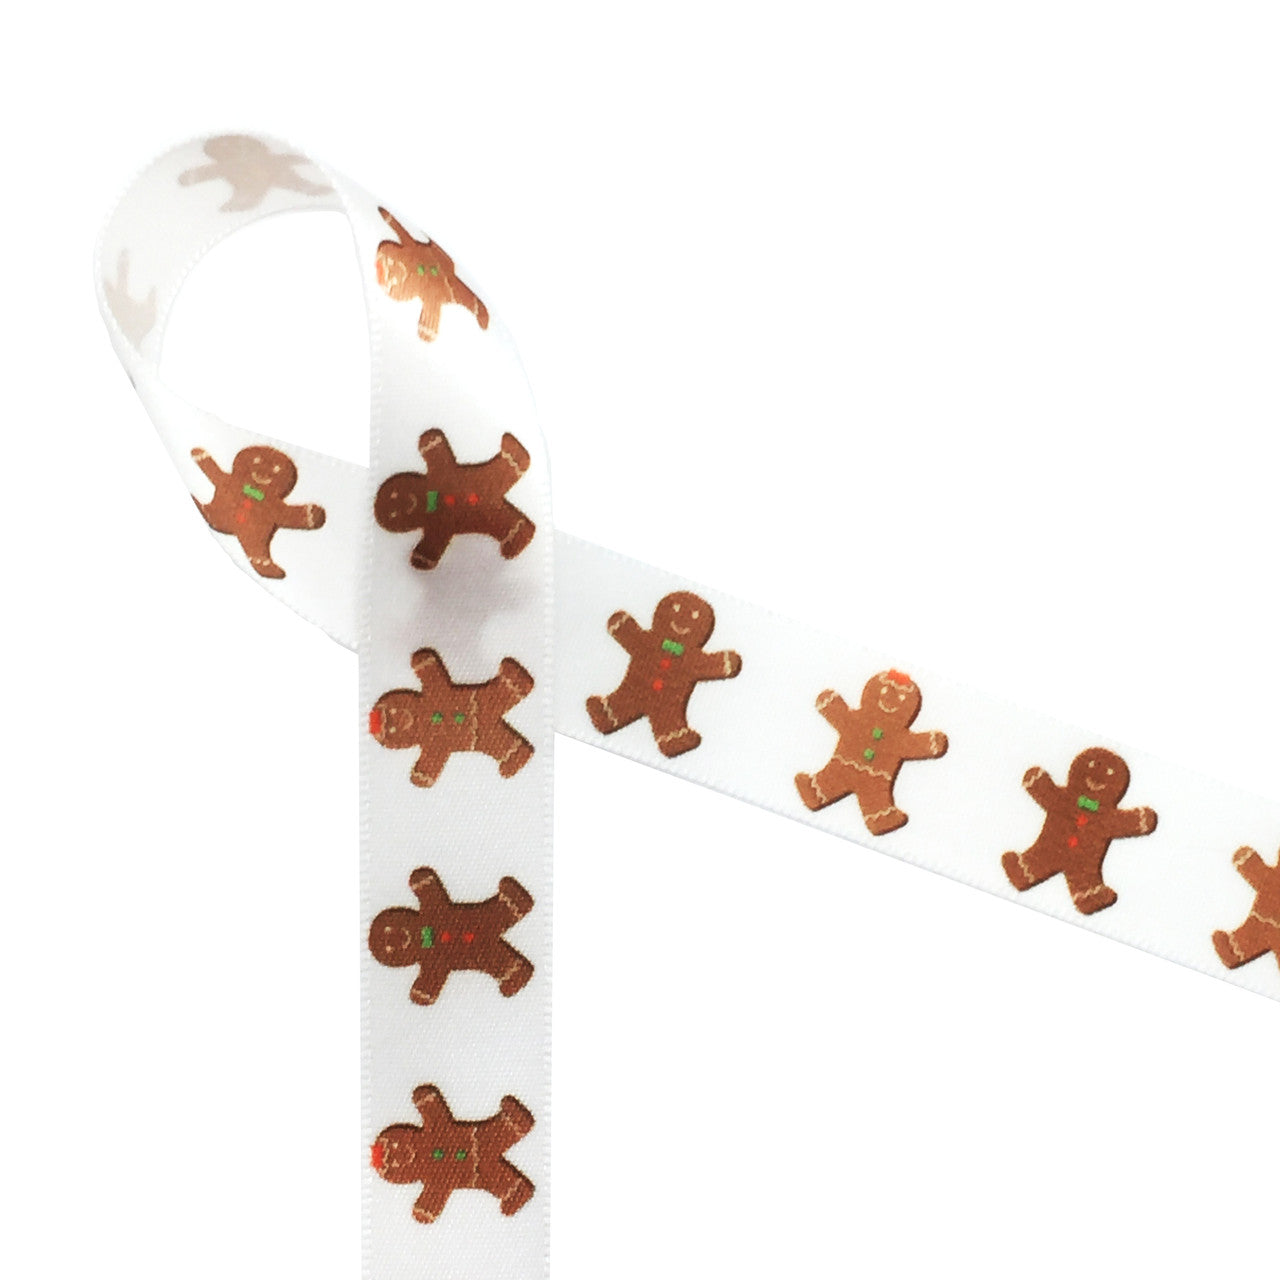 DIY -Gingerbread Man Rolling Pin Decor. Made for @TheMommyLife - YouTube